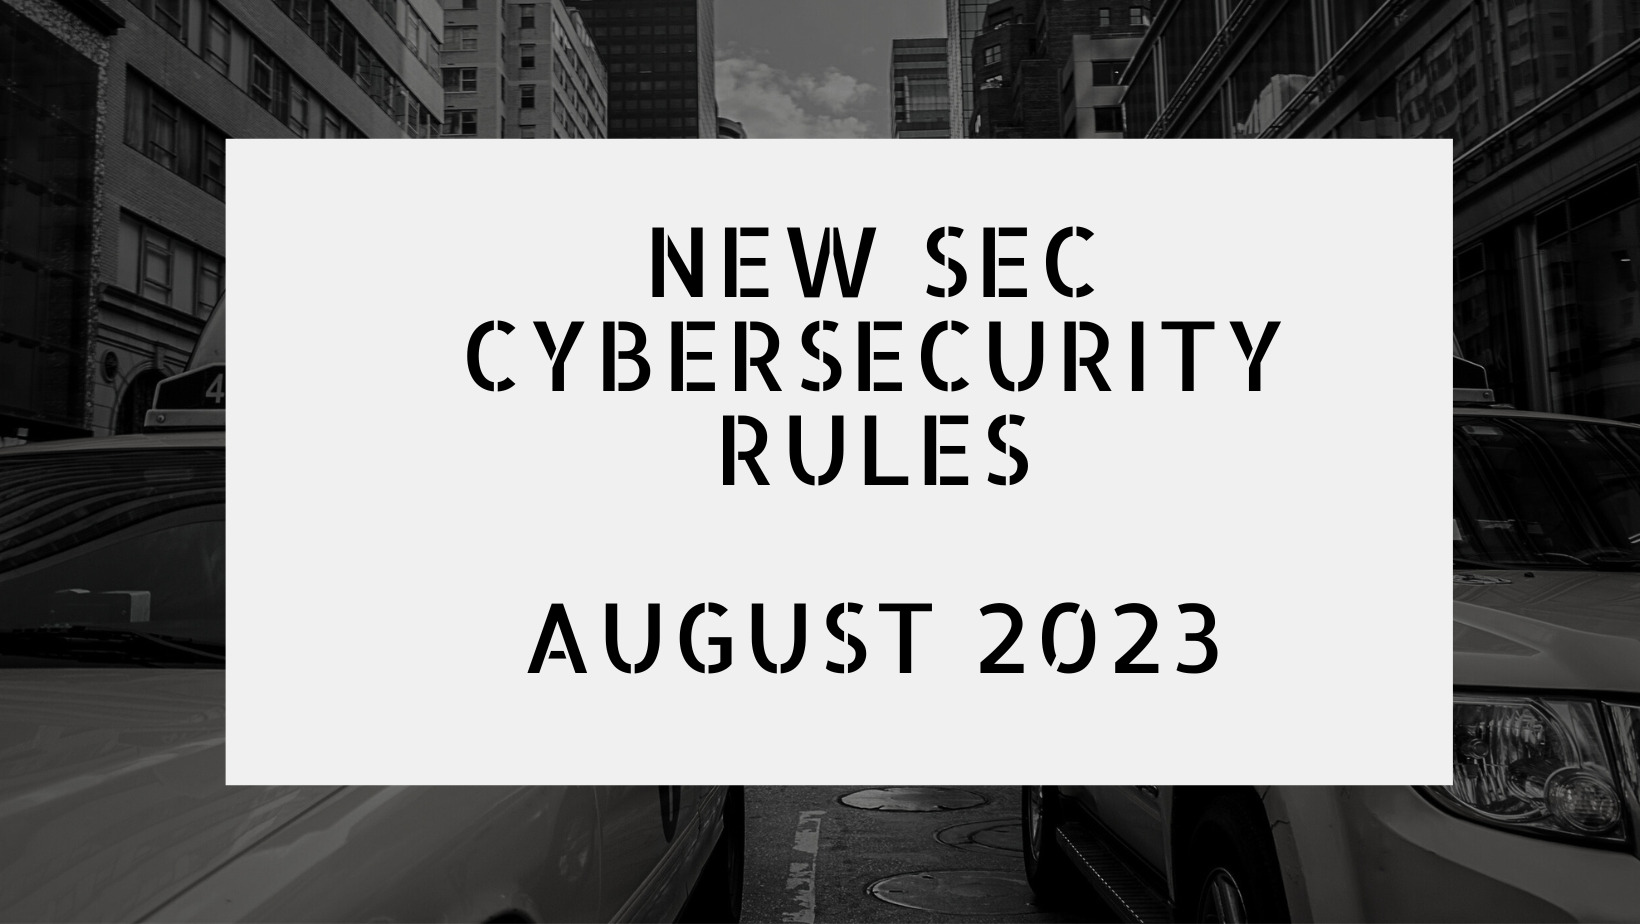 New SEC Cybersecurity Rules